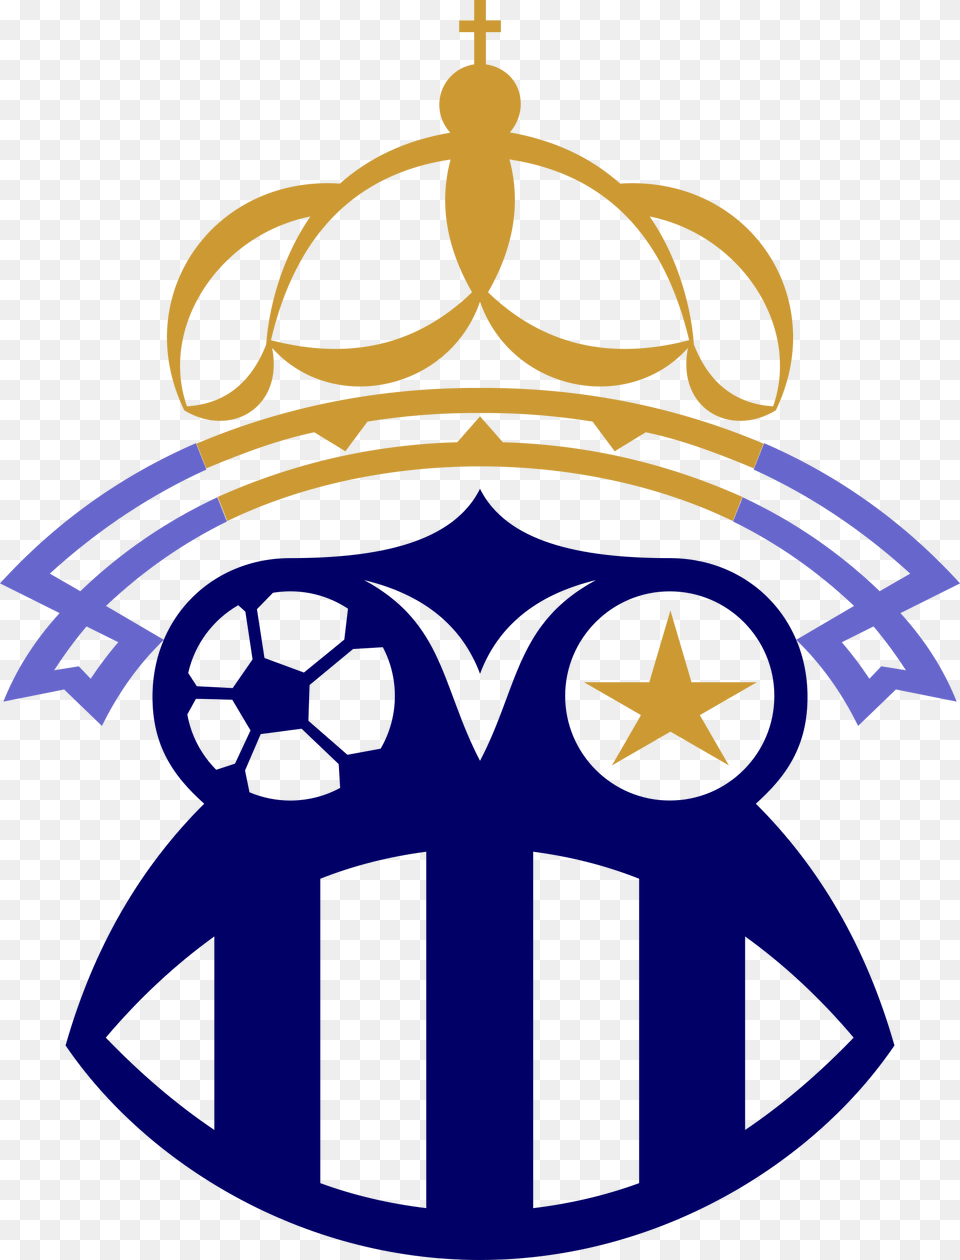 Logo Frog Soccer Club Logo 512x512 Dream League Soccer, Accessories, Jewelry, Crown, Emblem Png Image